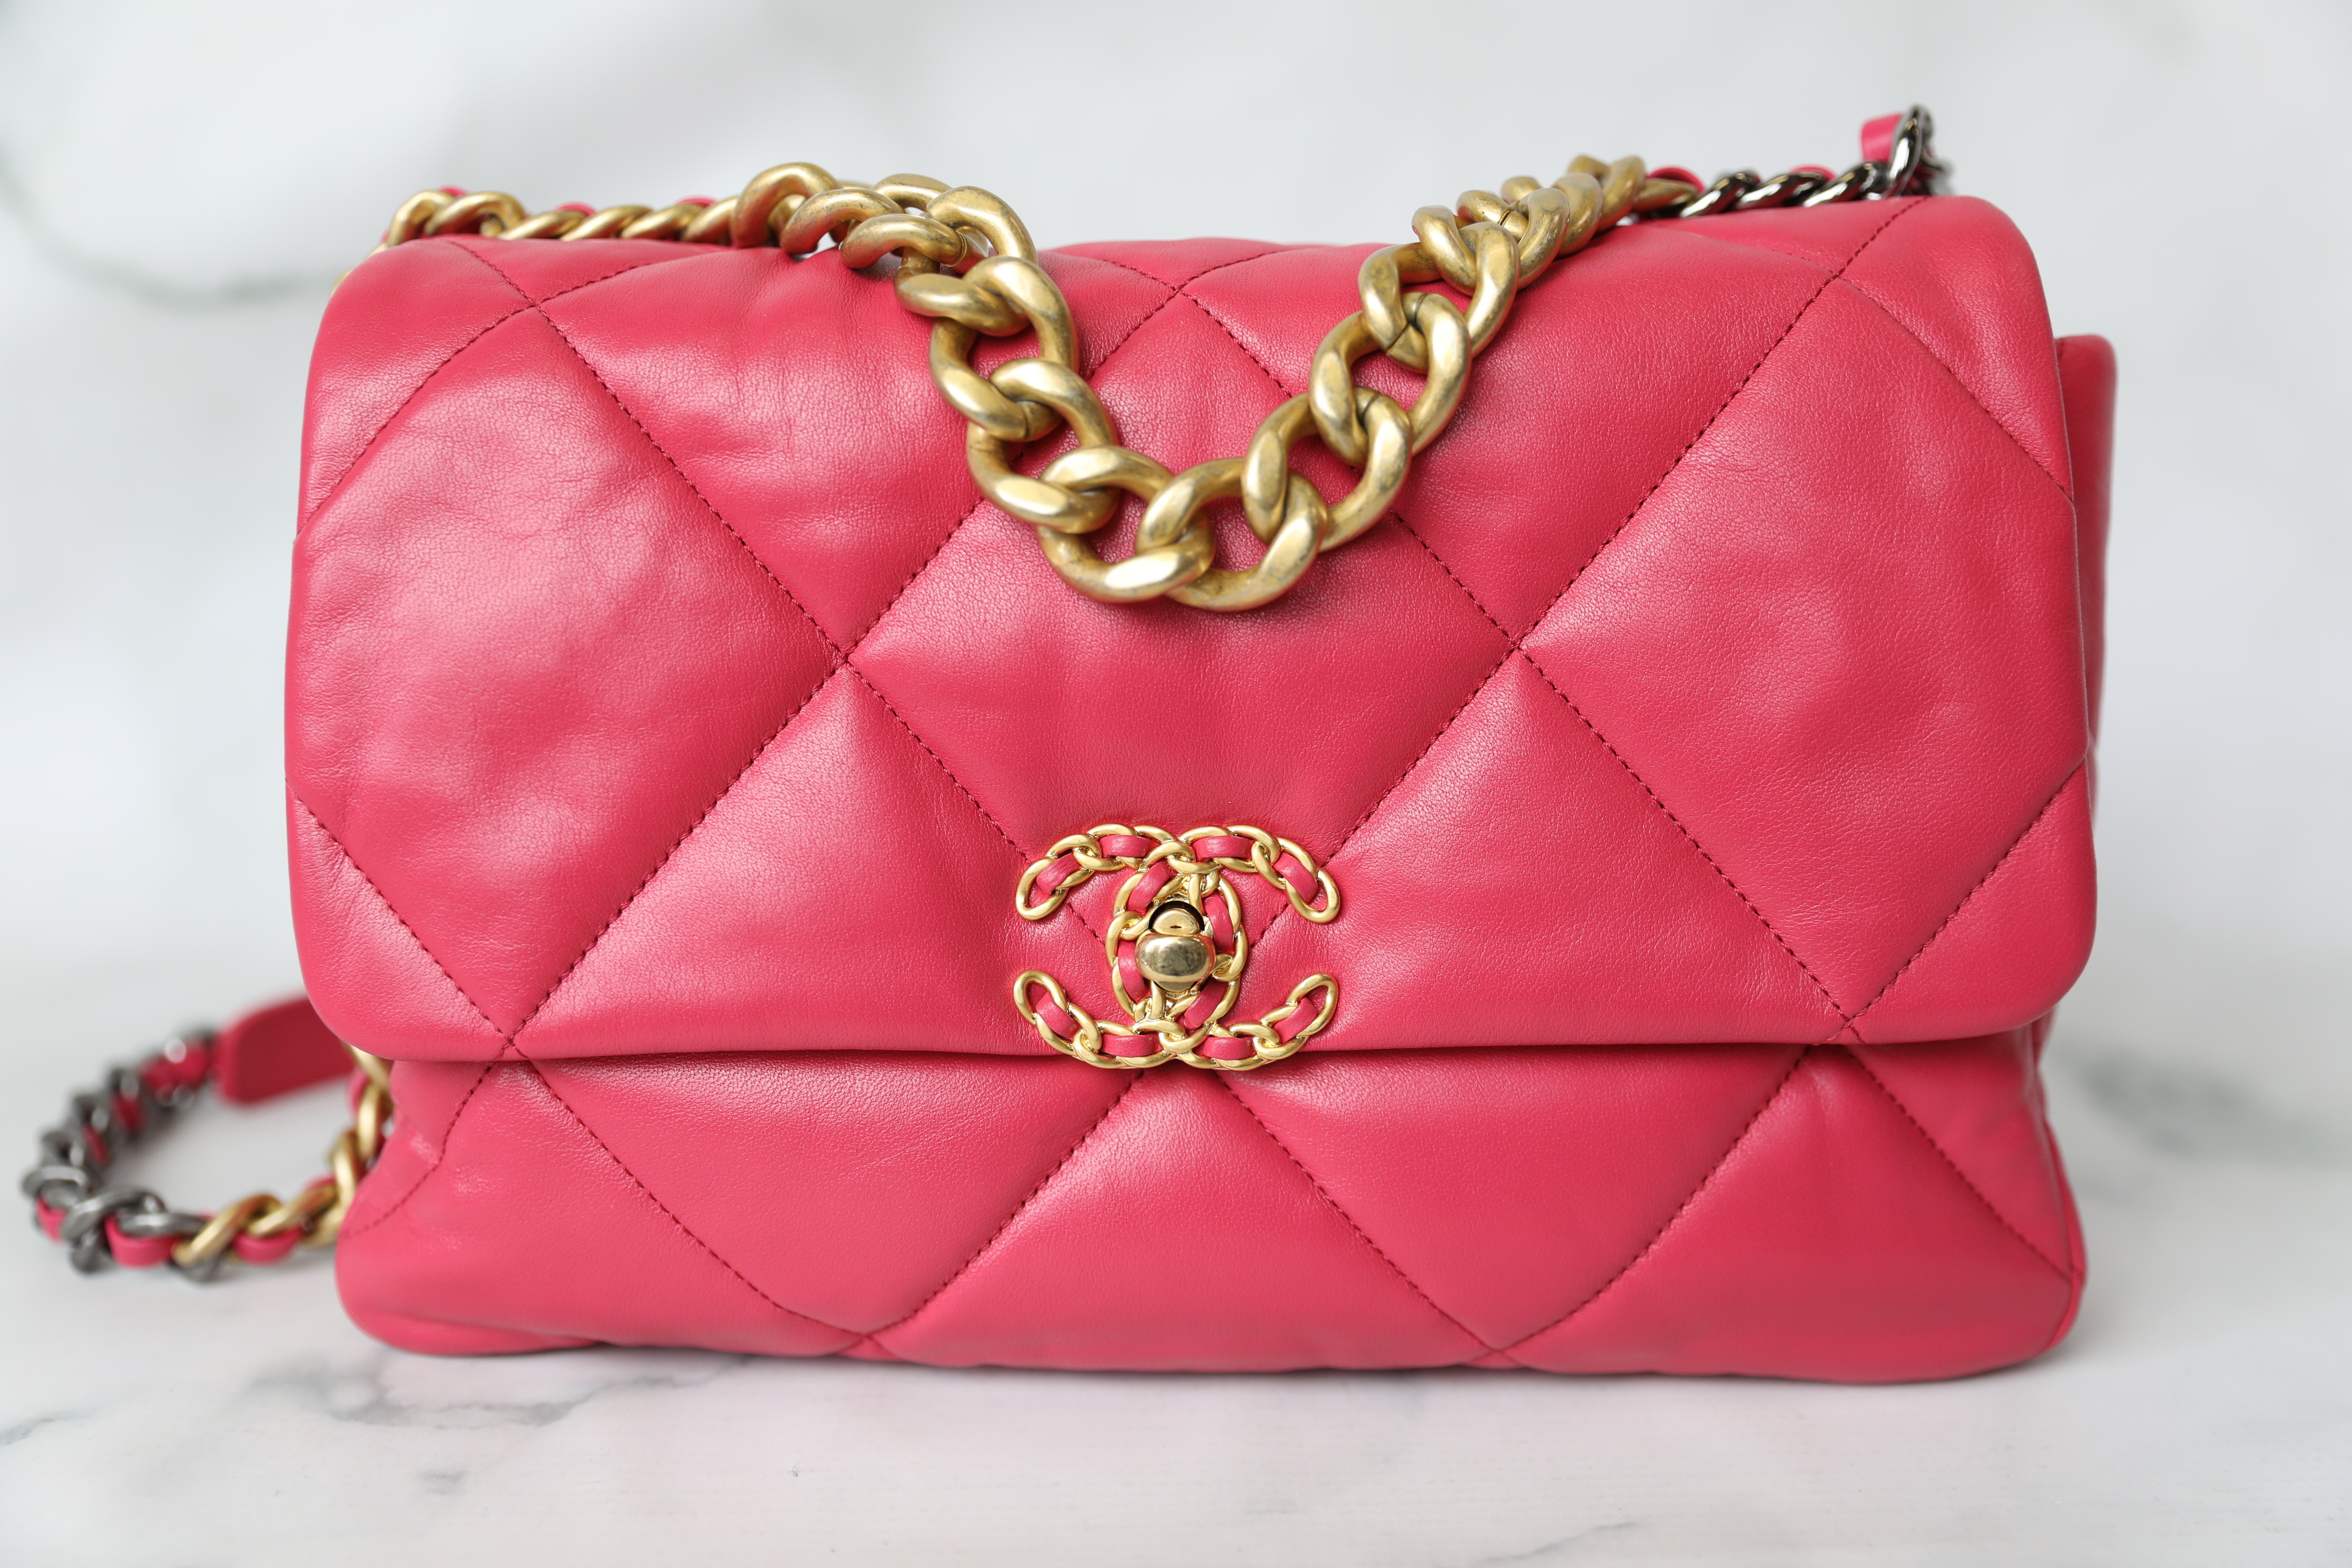 Chanel 19 Small, Bright Pink Lambskin Leather, Preowned in Box WA001